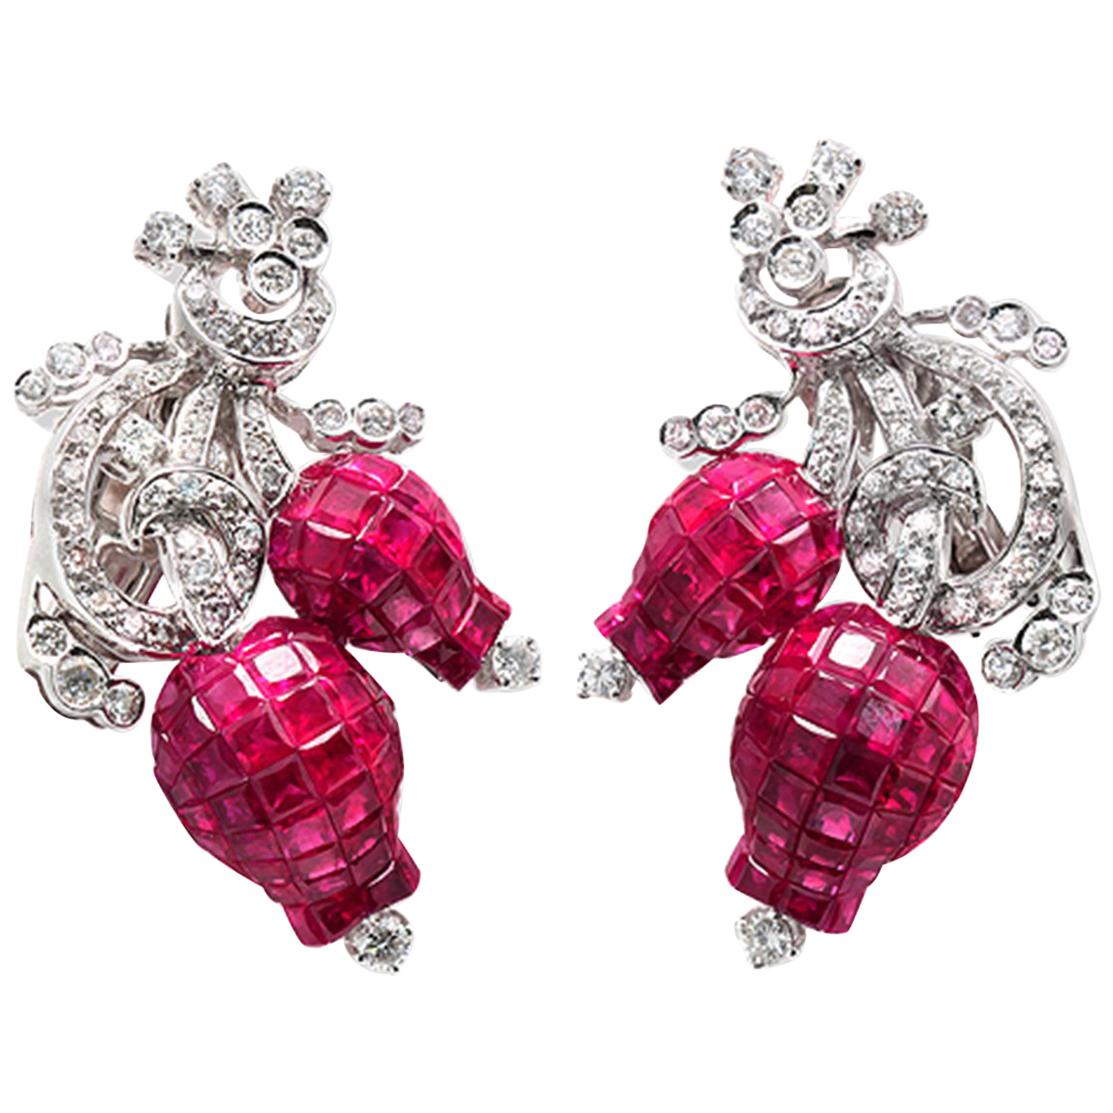 18 Kara Gold 1.99 Carat Diamonds and Invisible 25.22 Carat Ruby Tulip Earrings For Sale